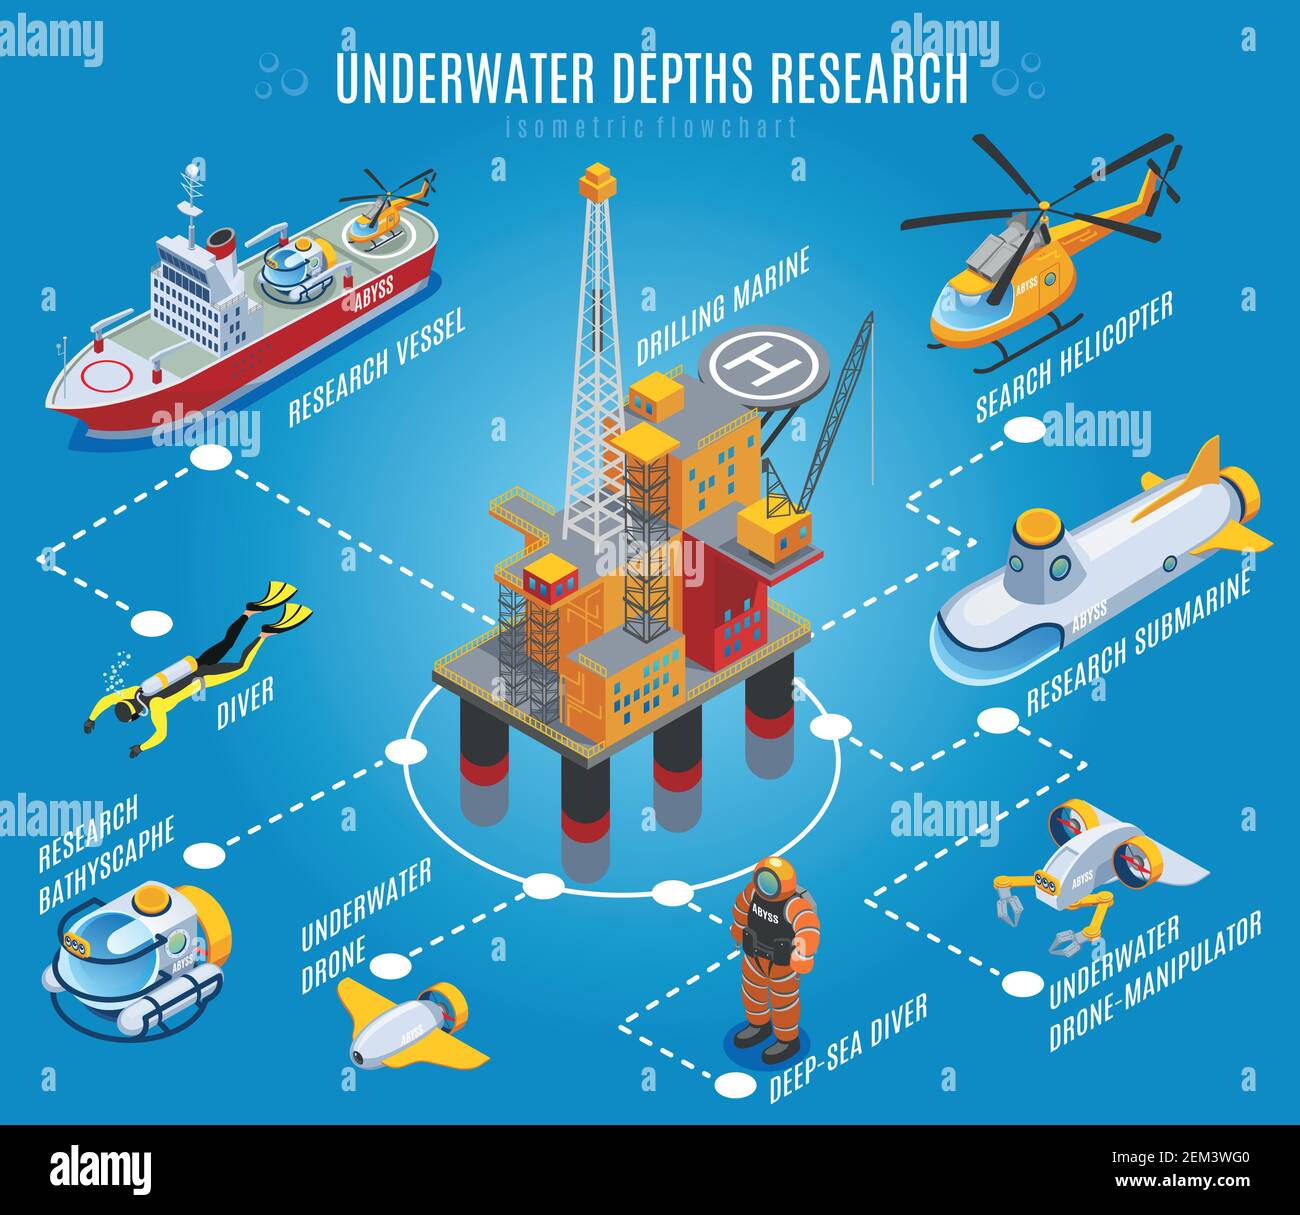 Underwater depths research isometric flowchart on blue background with drilling rig, transportation, unmanned equipment, divers vector illustration Stock Vector